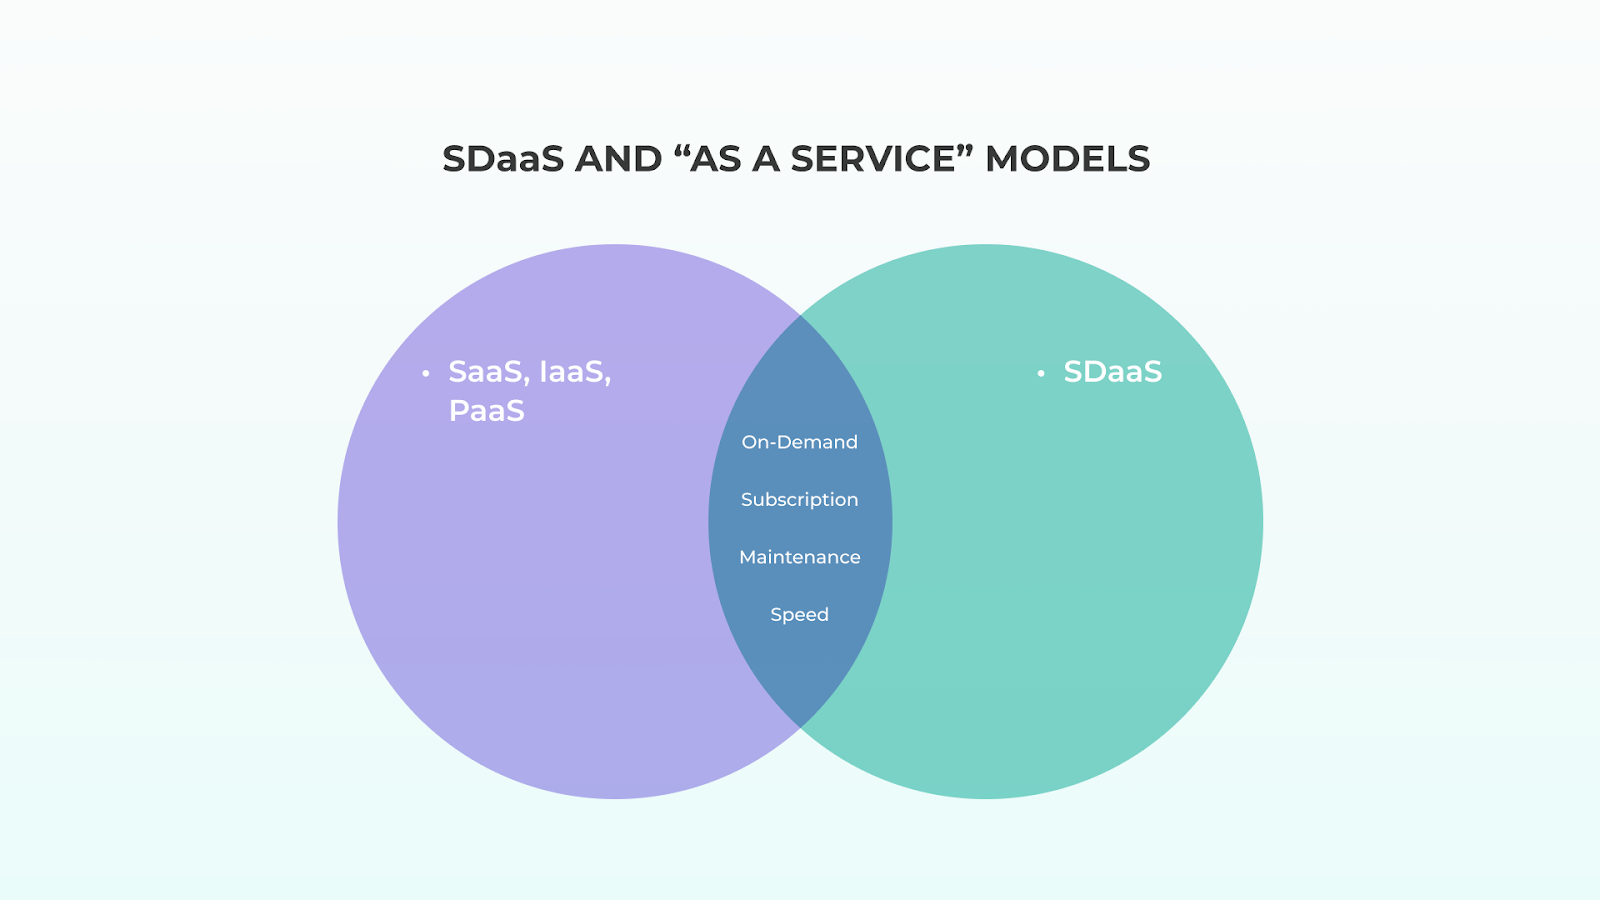 SDaaS AND “AS A SERVICE” MODELS